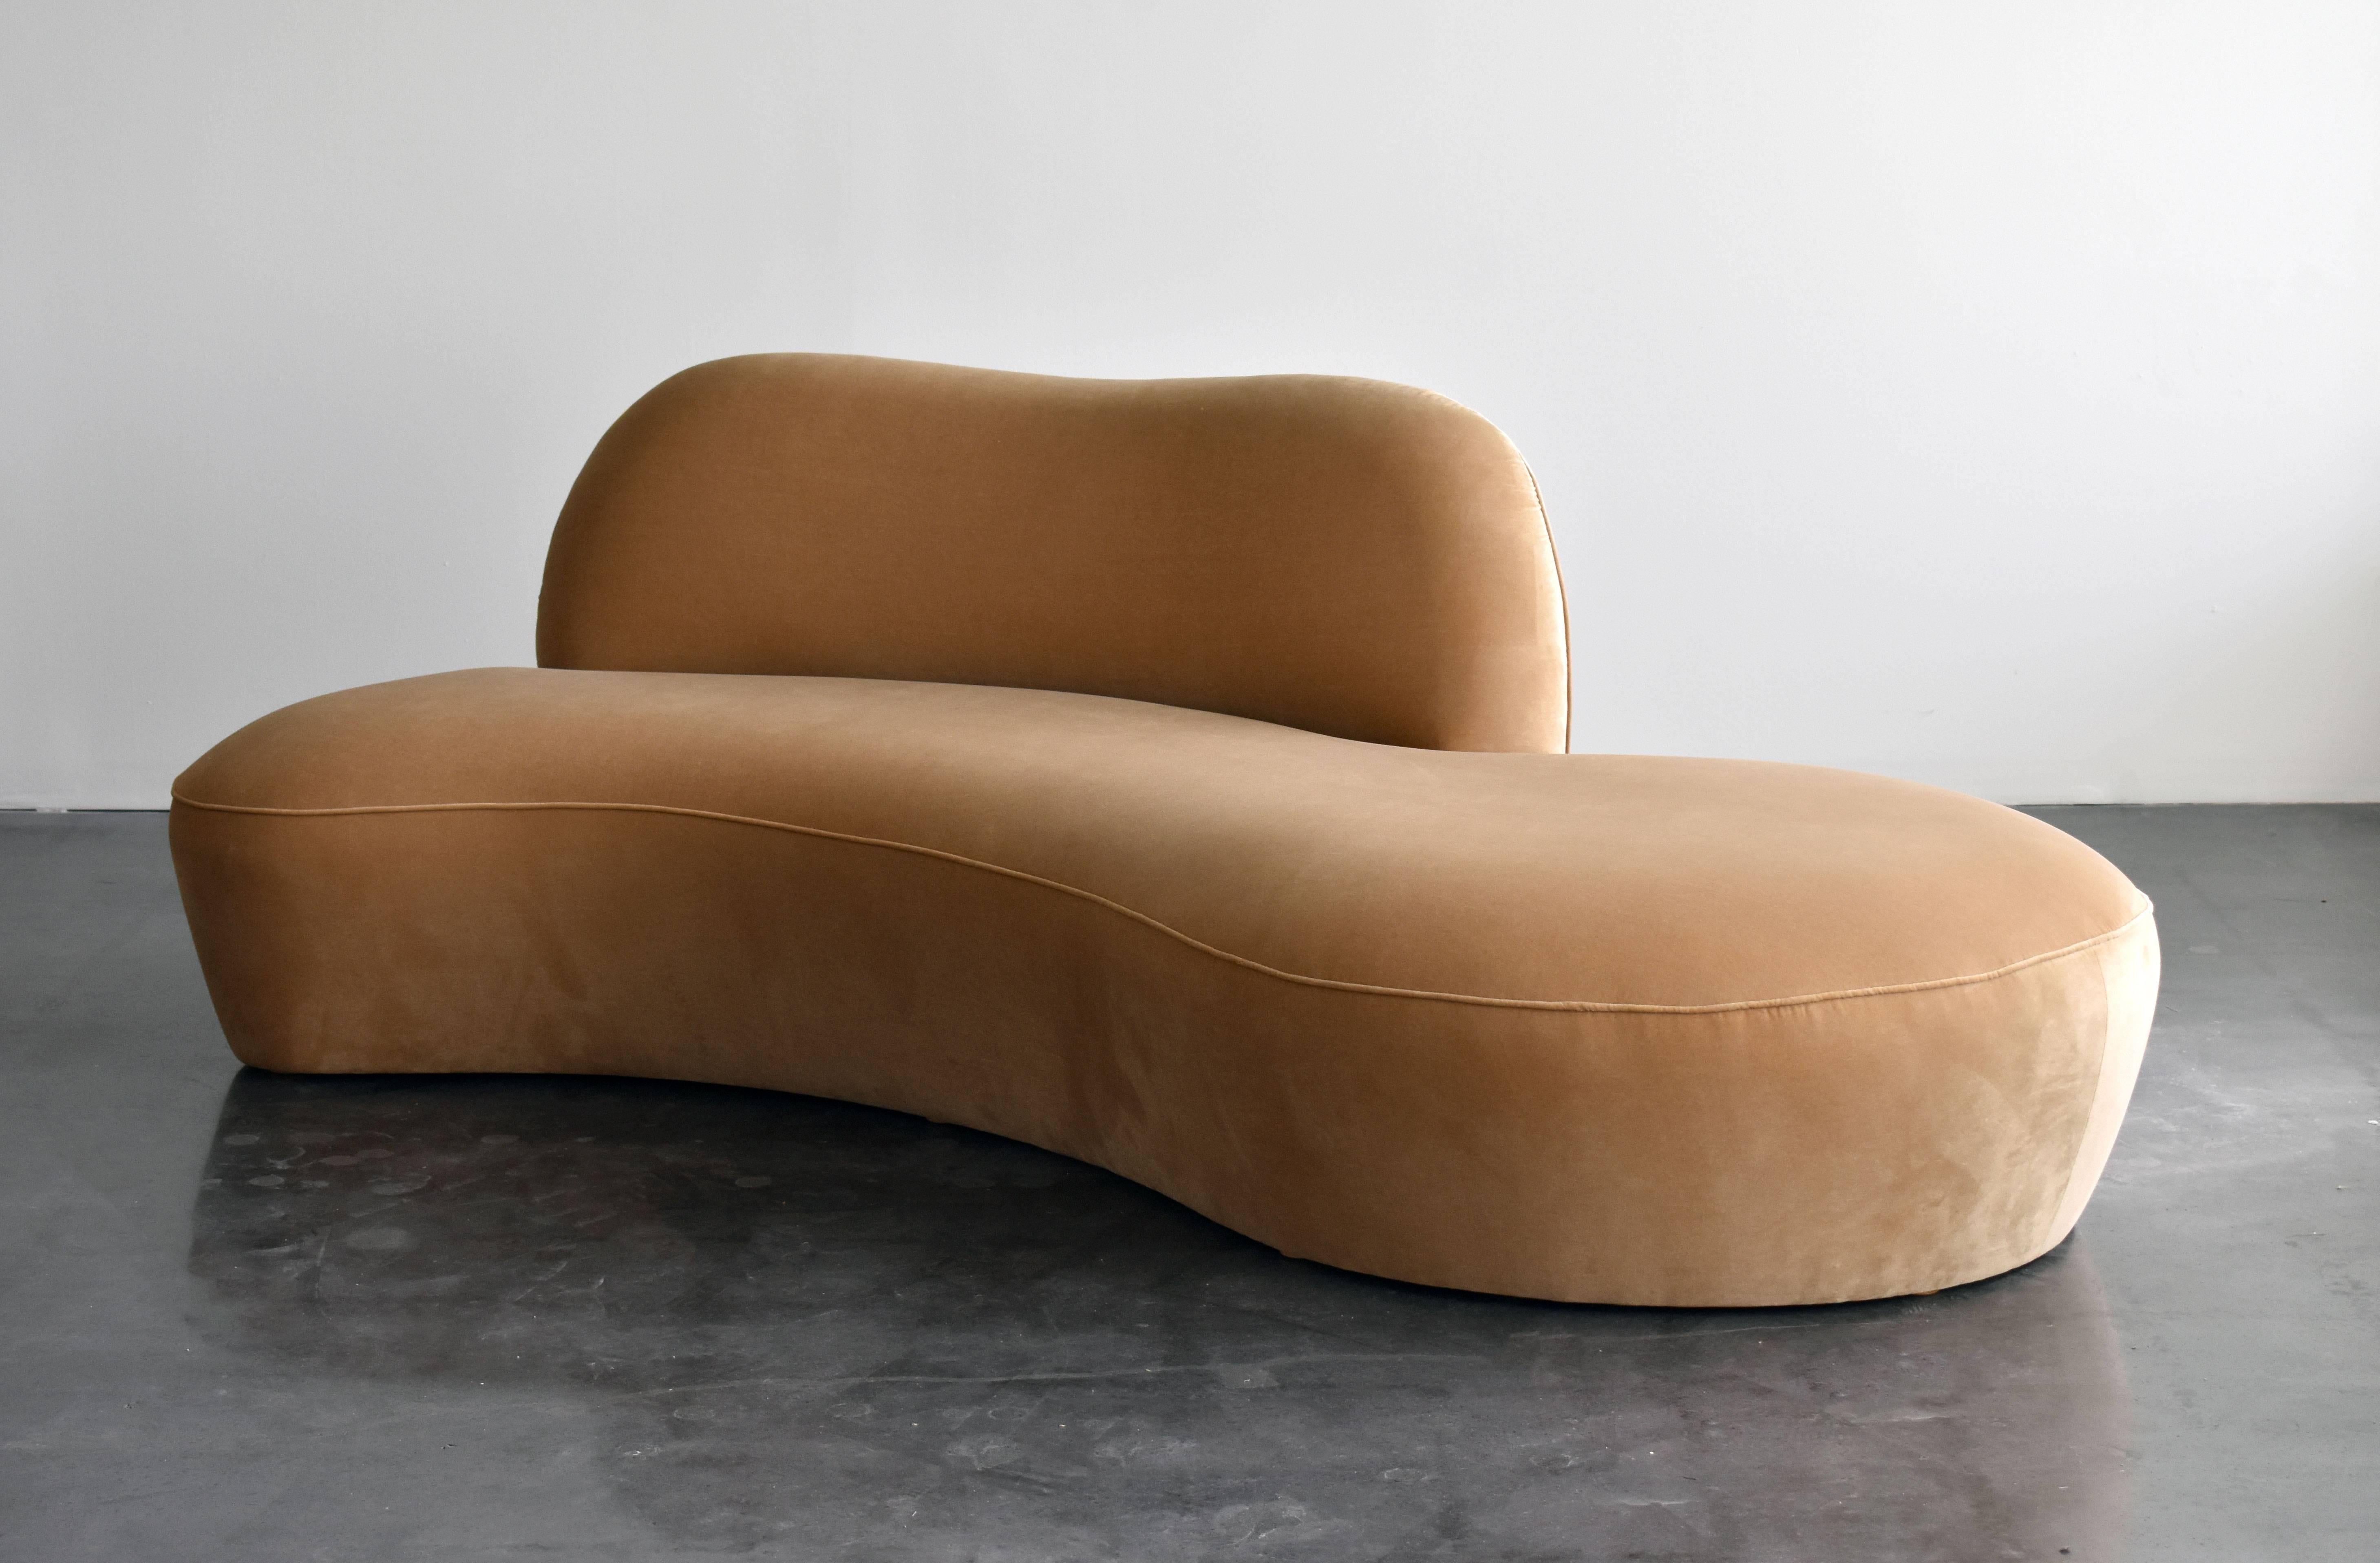 A sofa in light bronze velvet with a form referencing the early organic design movement. Comfortable backrest. Rare version executed in limited numbers for room and board.